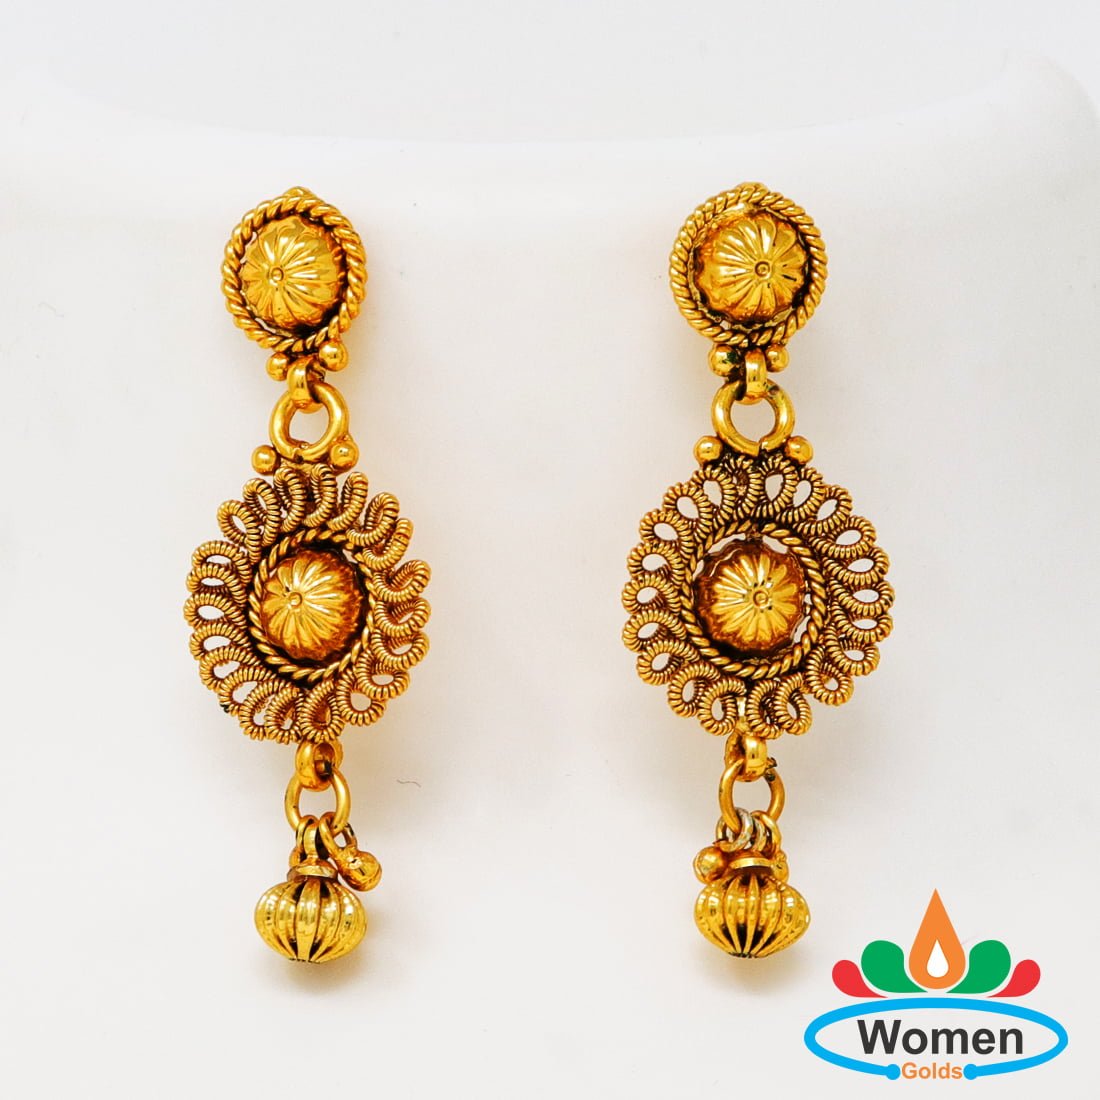 Ahsaas 1gm Gold Plated With CZ & Ruby Stones Earrings : Amazon.in: Fashion